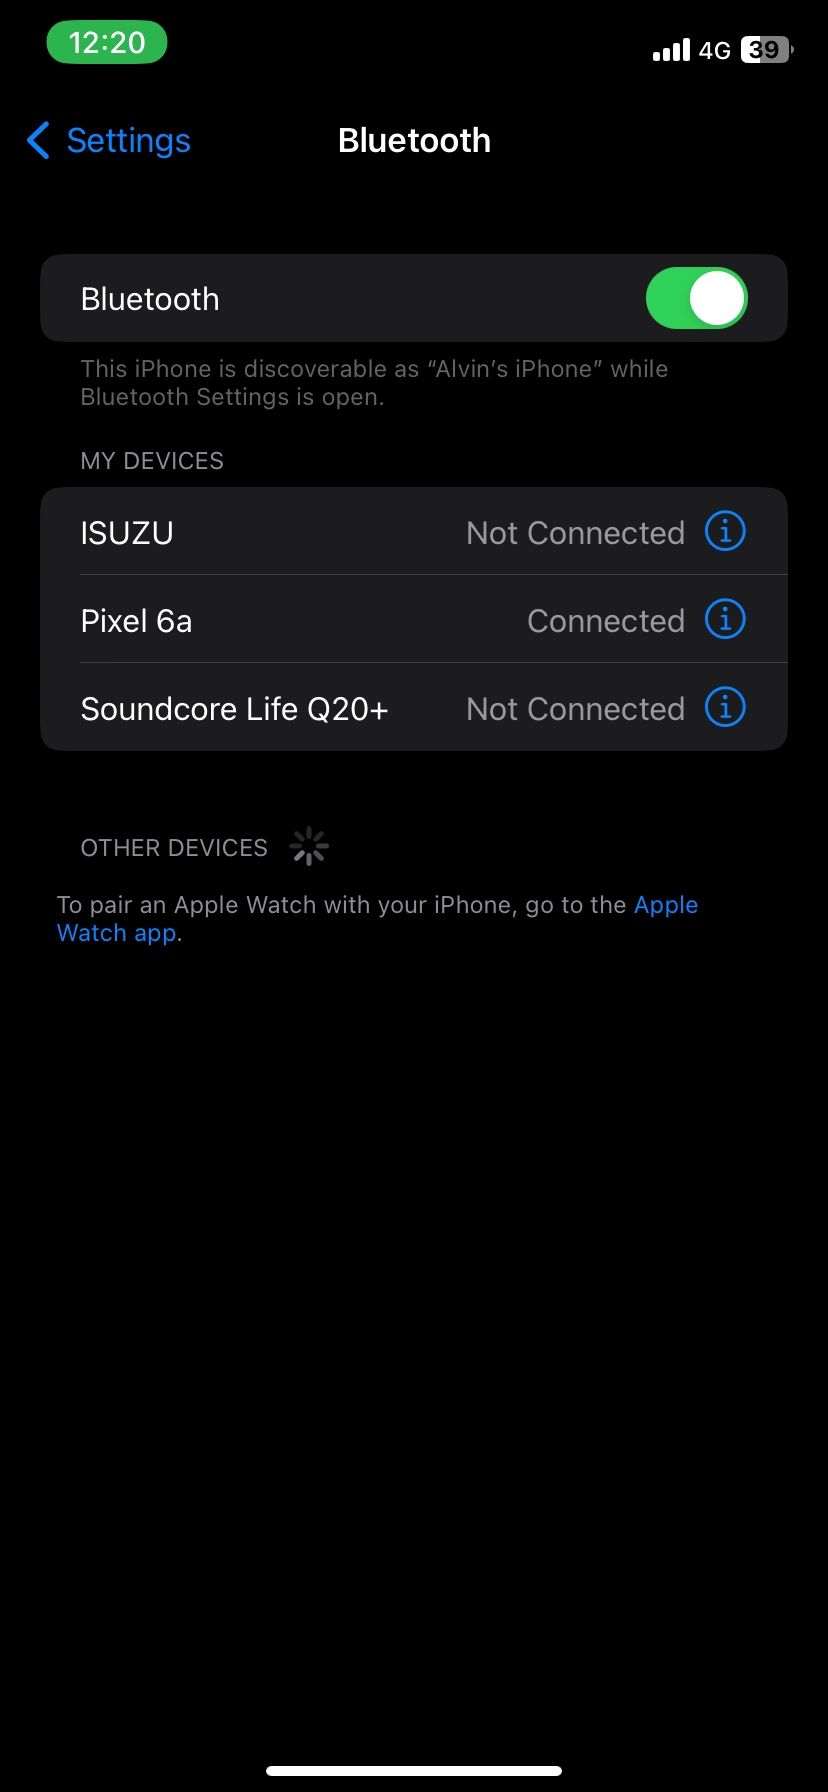 iPhone connected to another device via Bluetooth